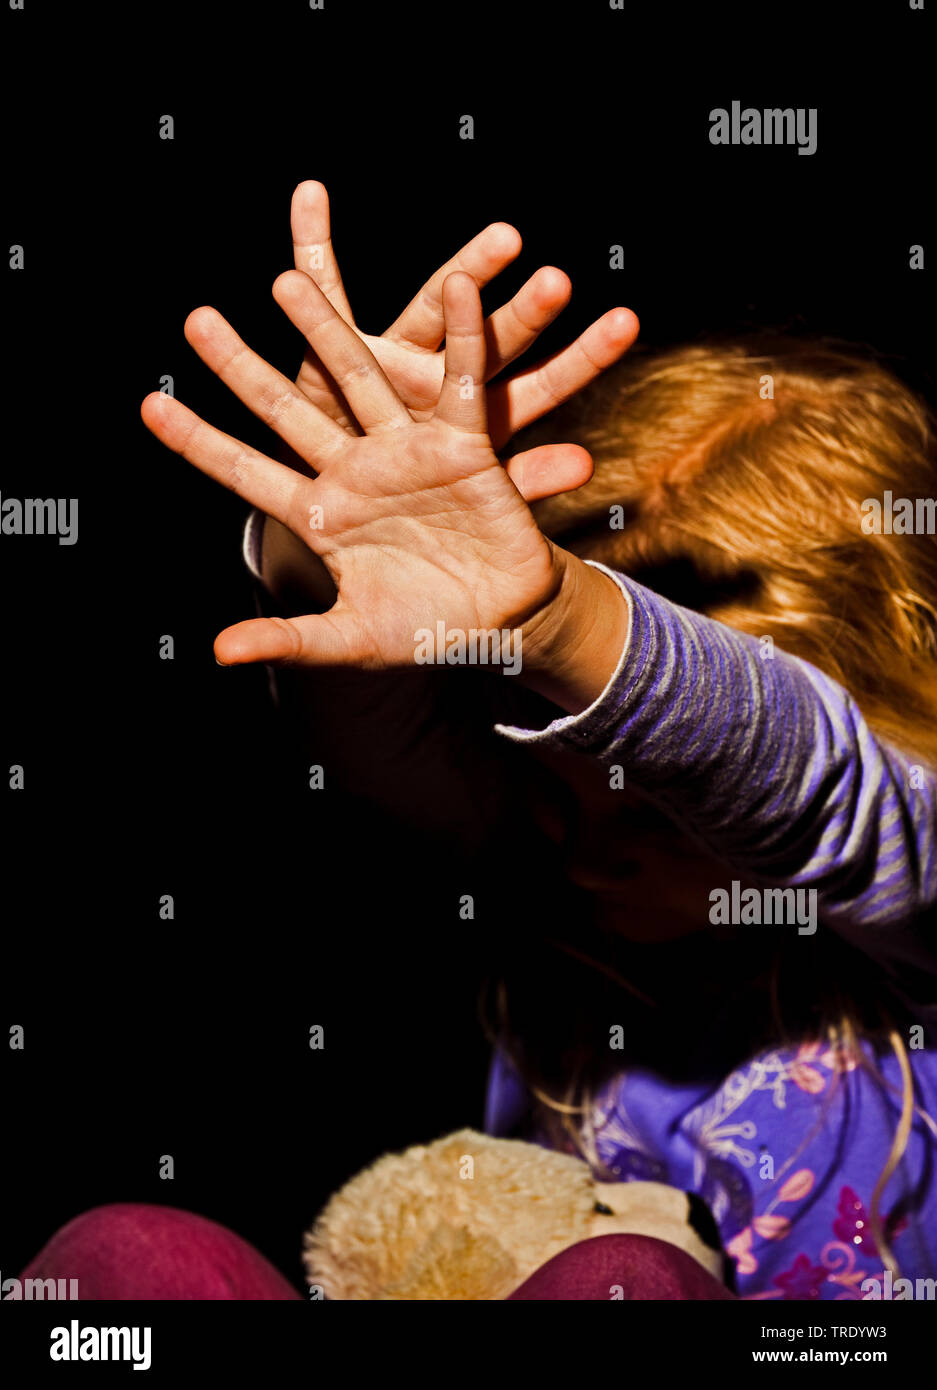 Portrait of a young girl outstreching her arms for protection - child abuse Stock Photo